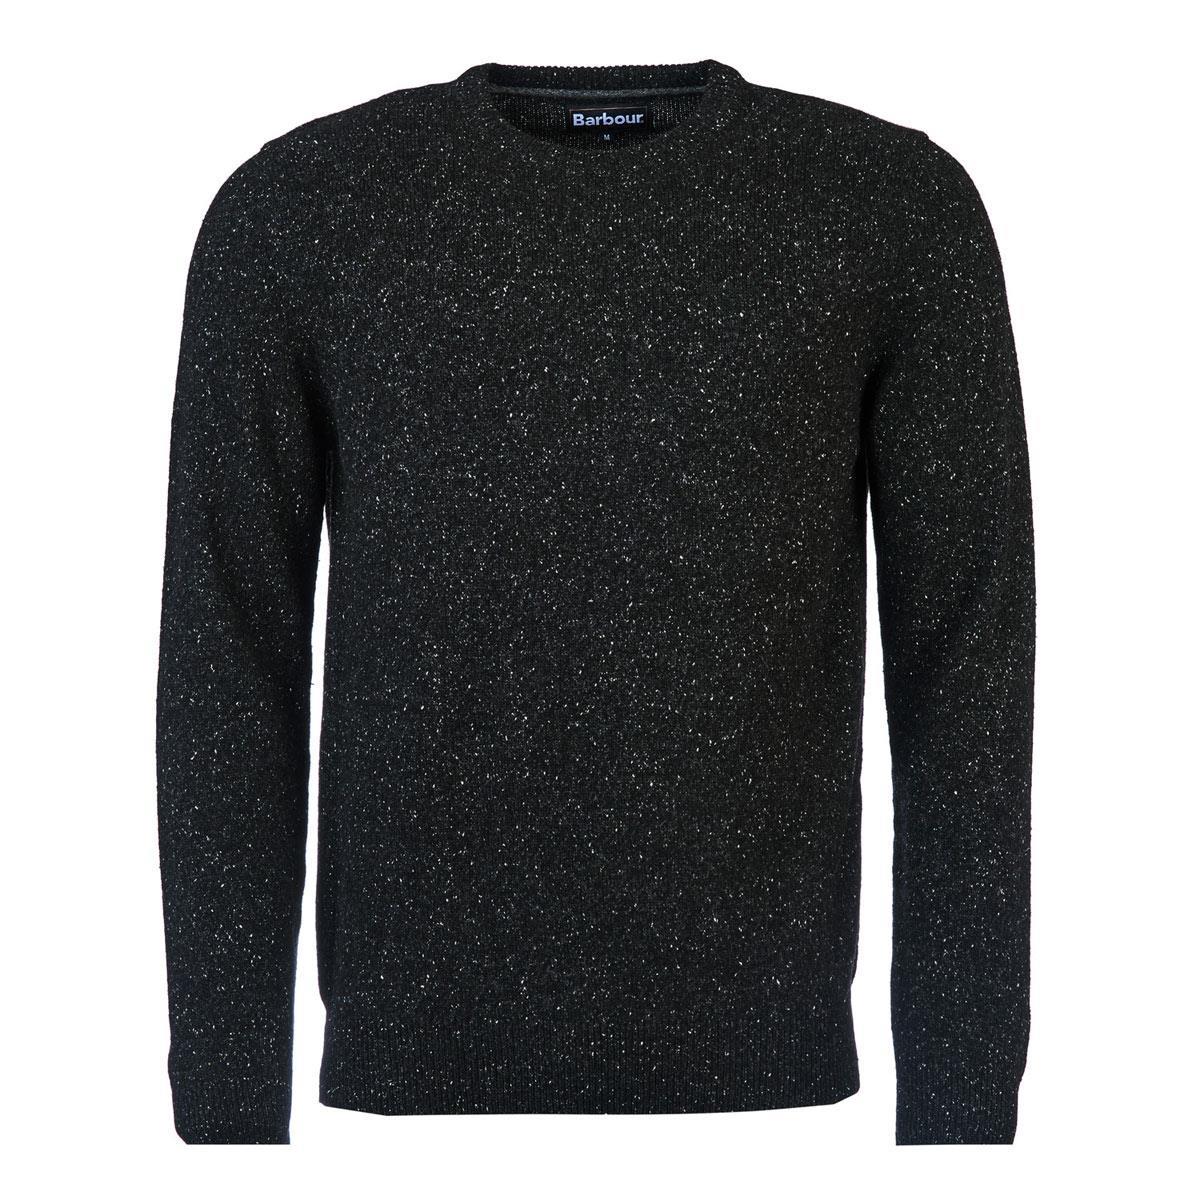 What are the key features of the Barbour Tisbury Crew Neck sweater?